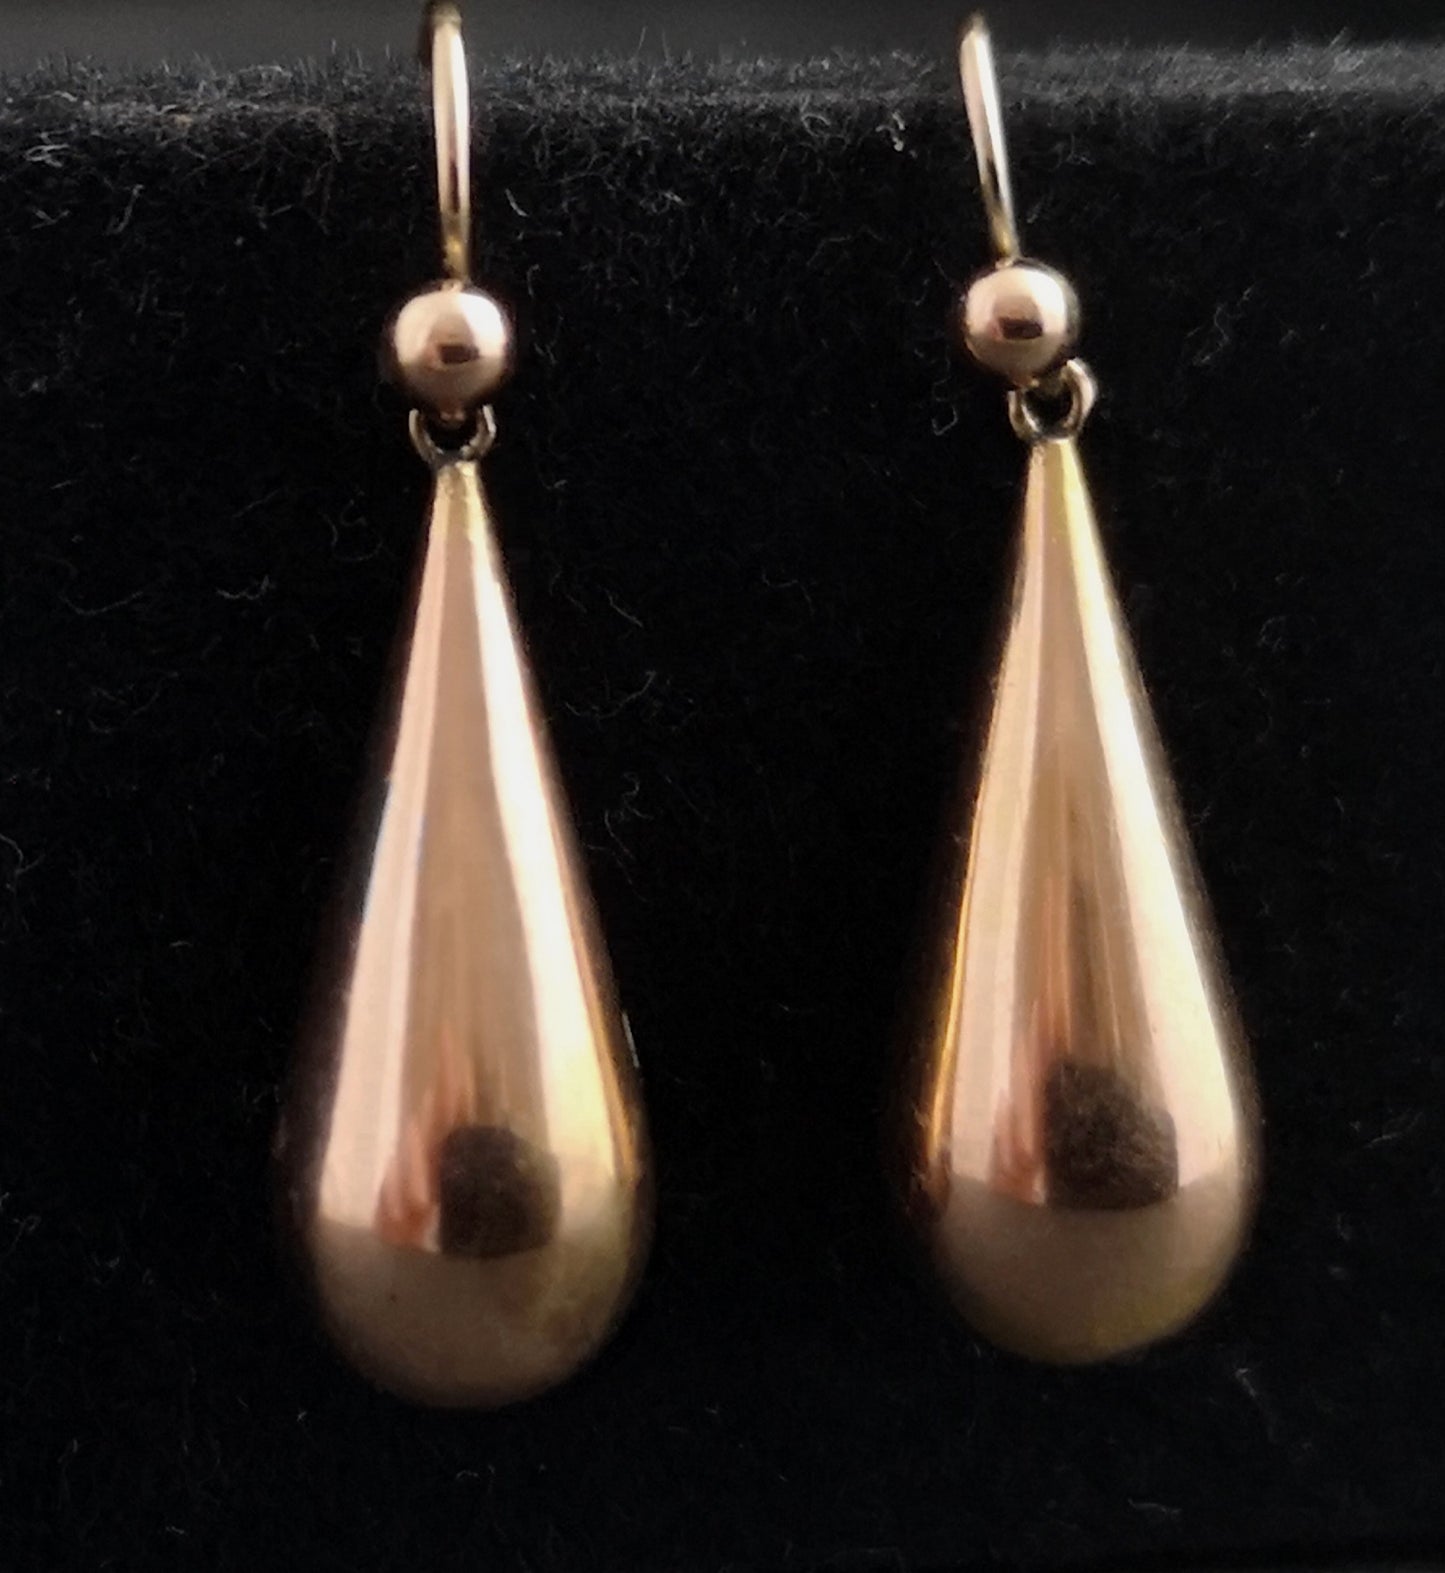 Antique Victorian 9ct gold drop earrings, rose gold